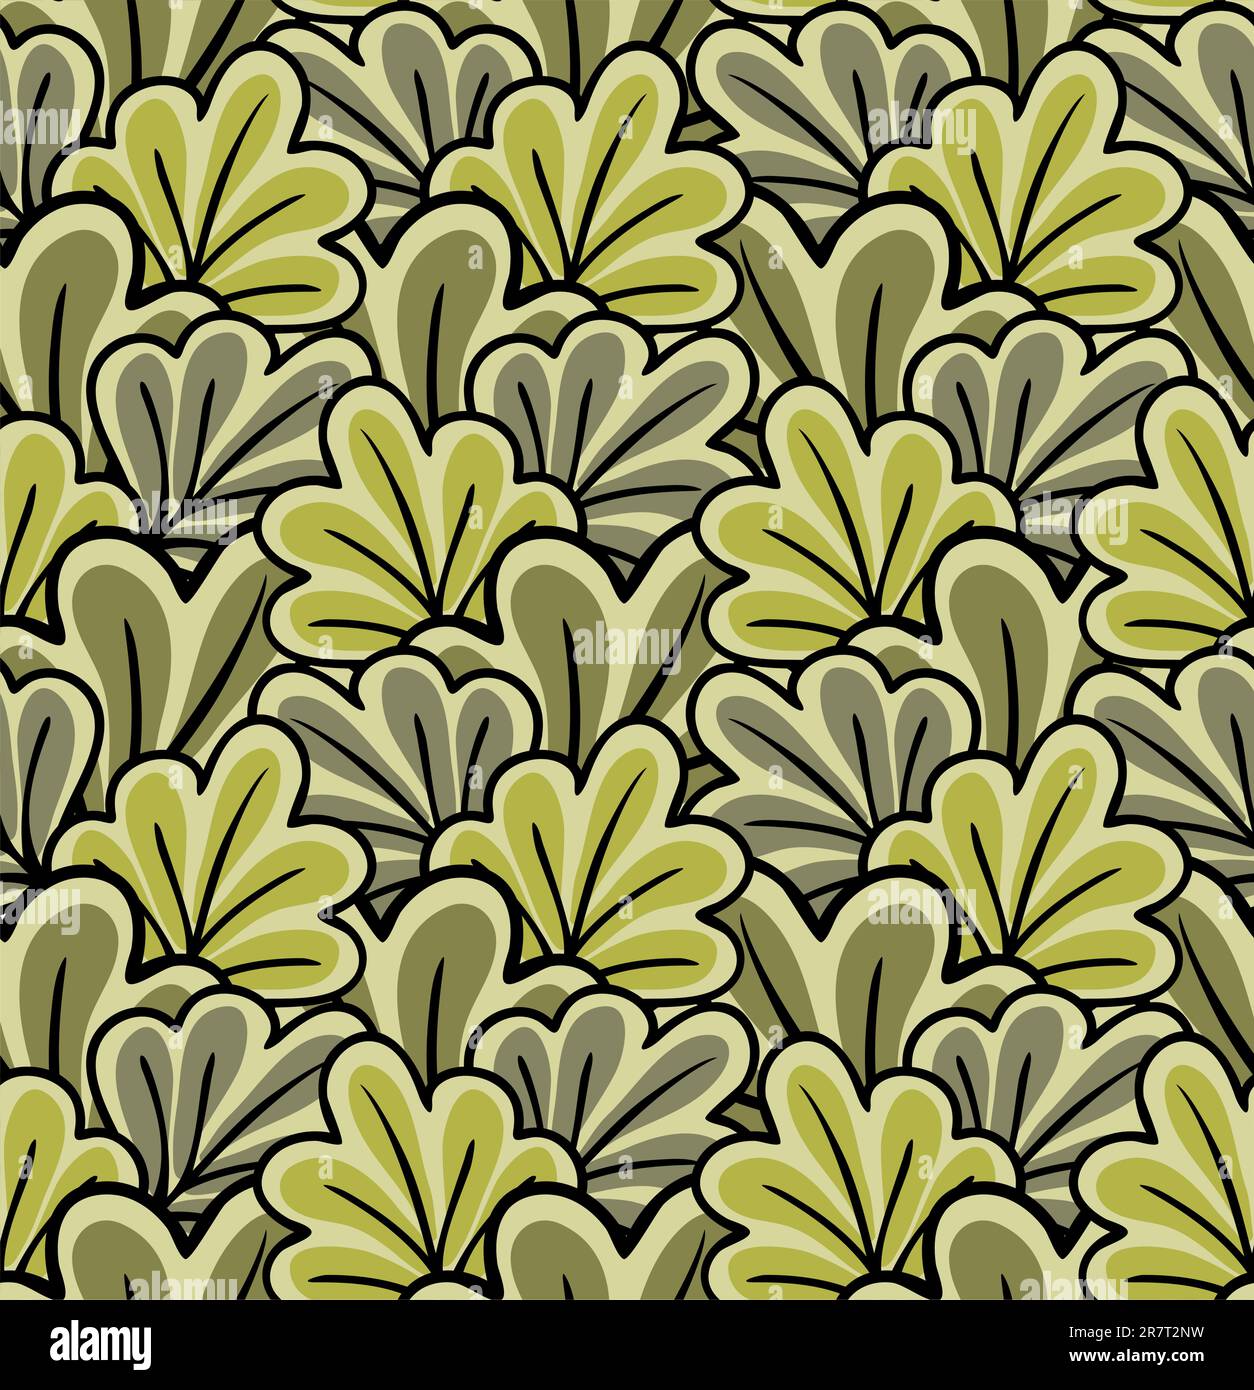 seamless background of stylized leaves greens Stock Vector